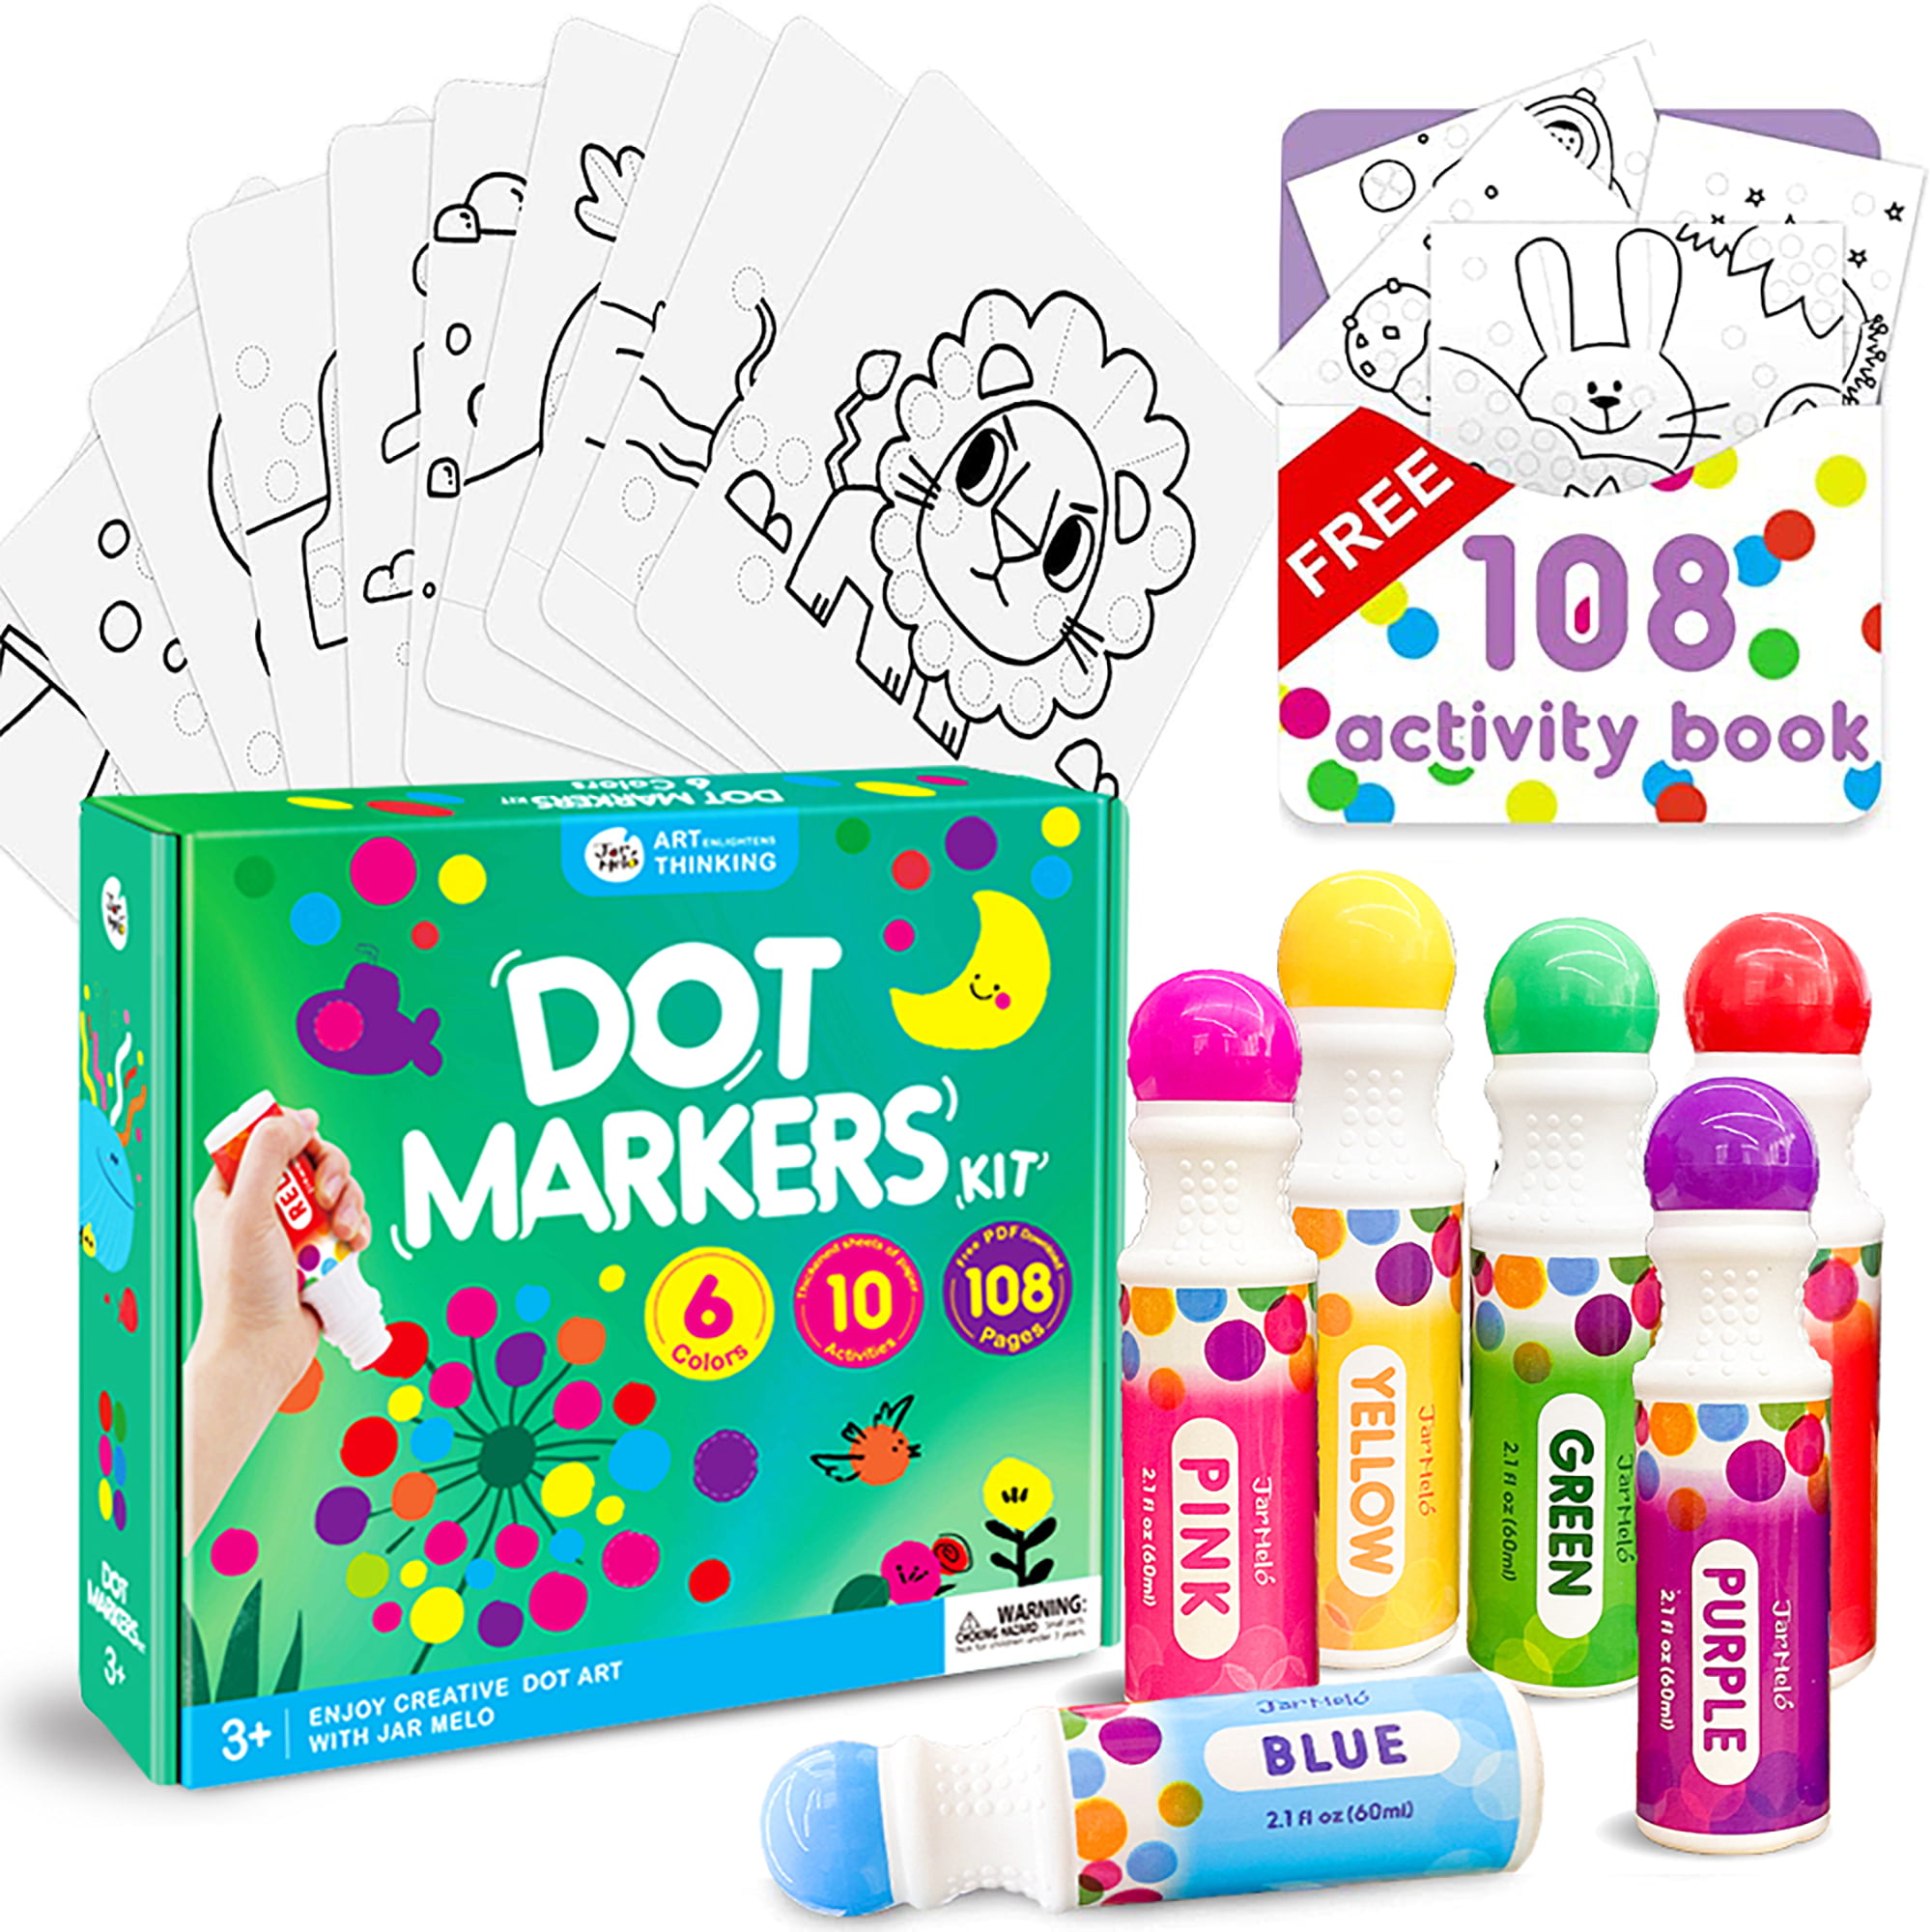 Magicfly Washable Dot Markers 8/12 Colors